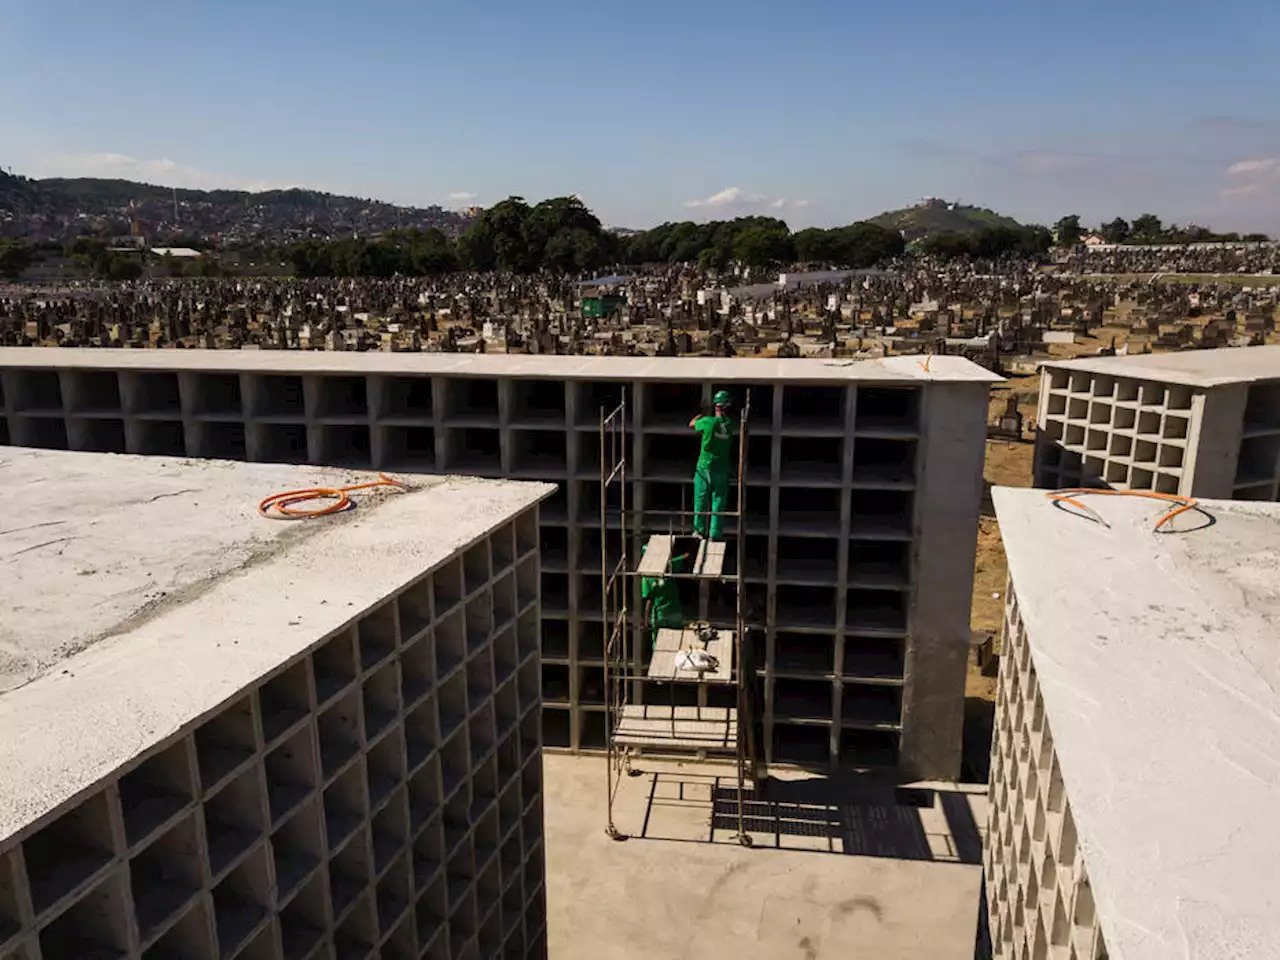 With the coronavirus pandemic, the Irajá and Inhaúma Cemeteries in the northern part of Rio are building thousands of crypts to house the dead.